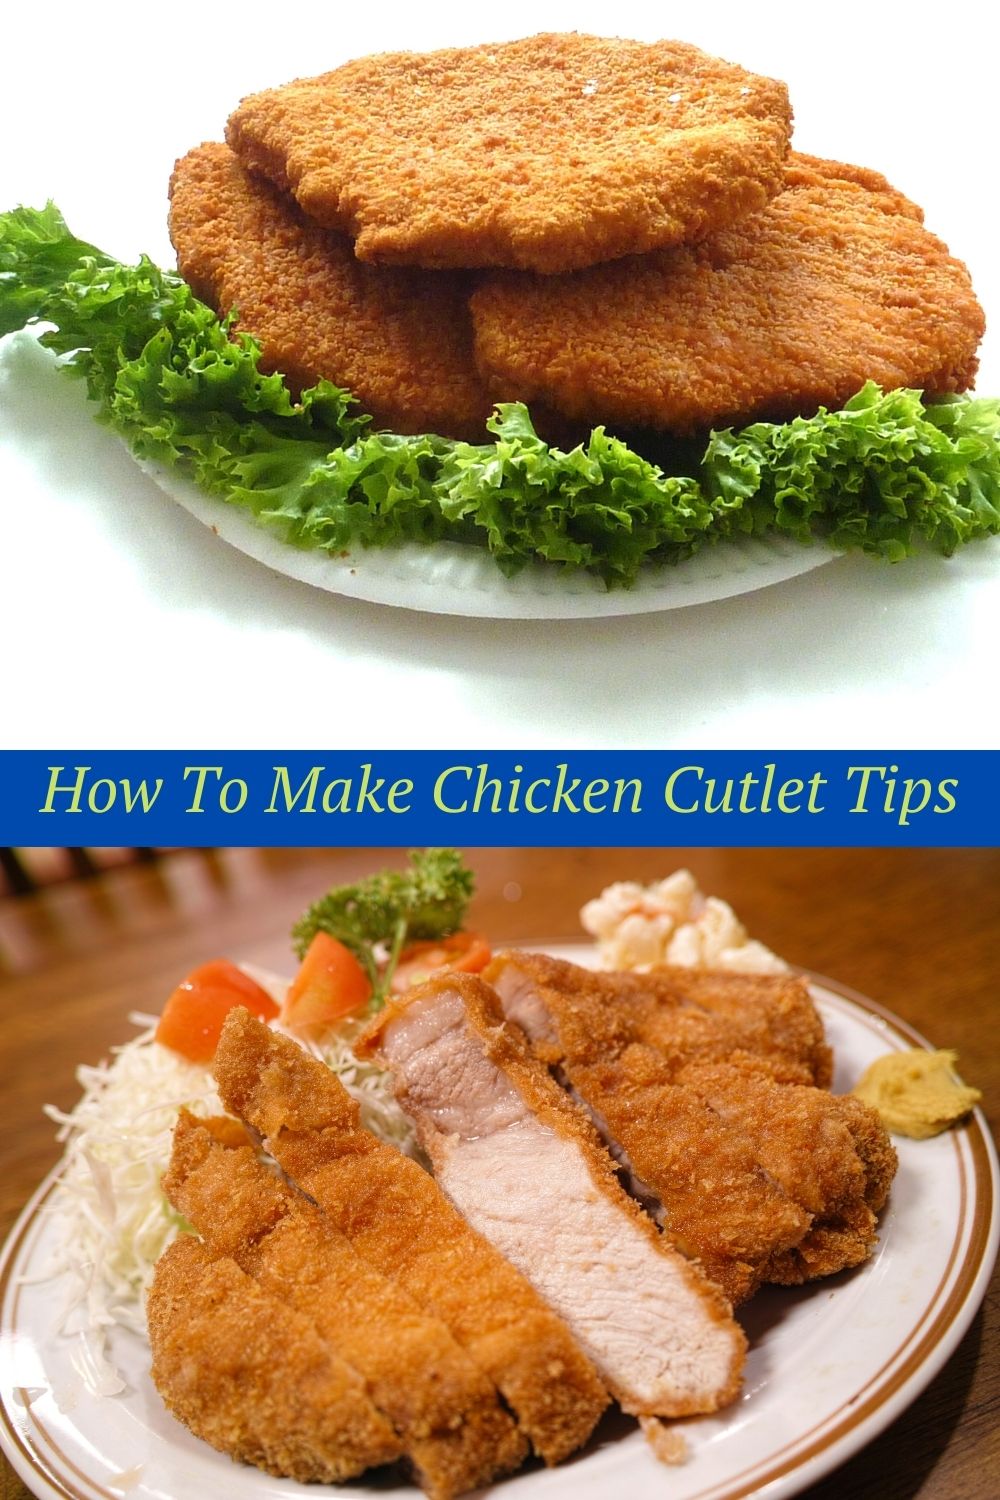 How To Make Chicken Cutlet Tips